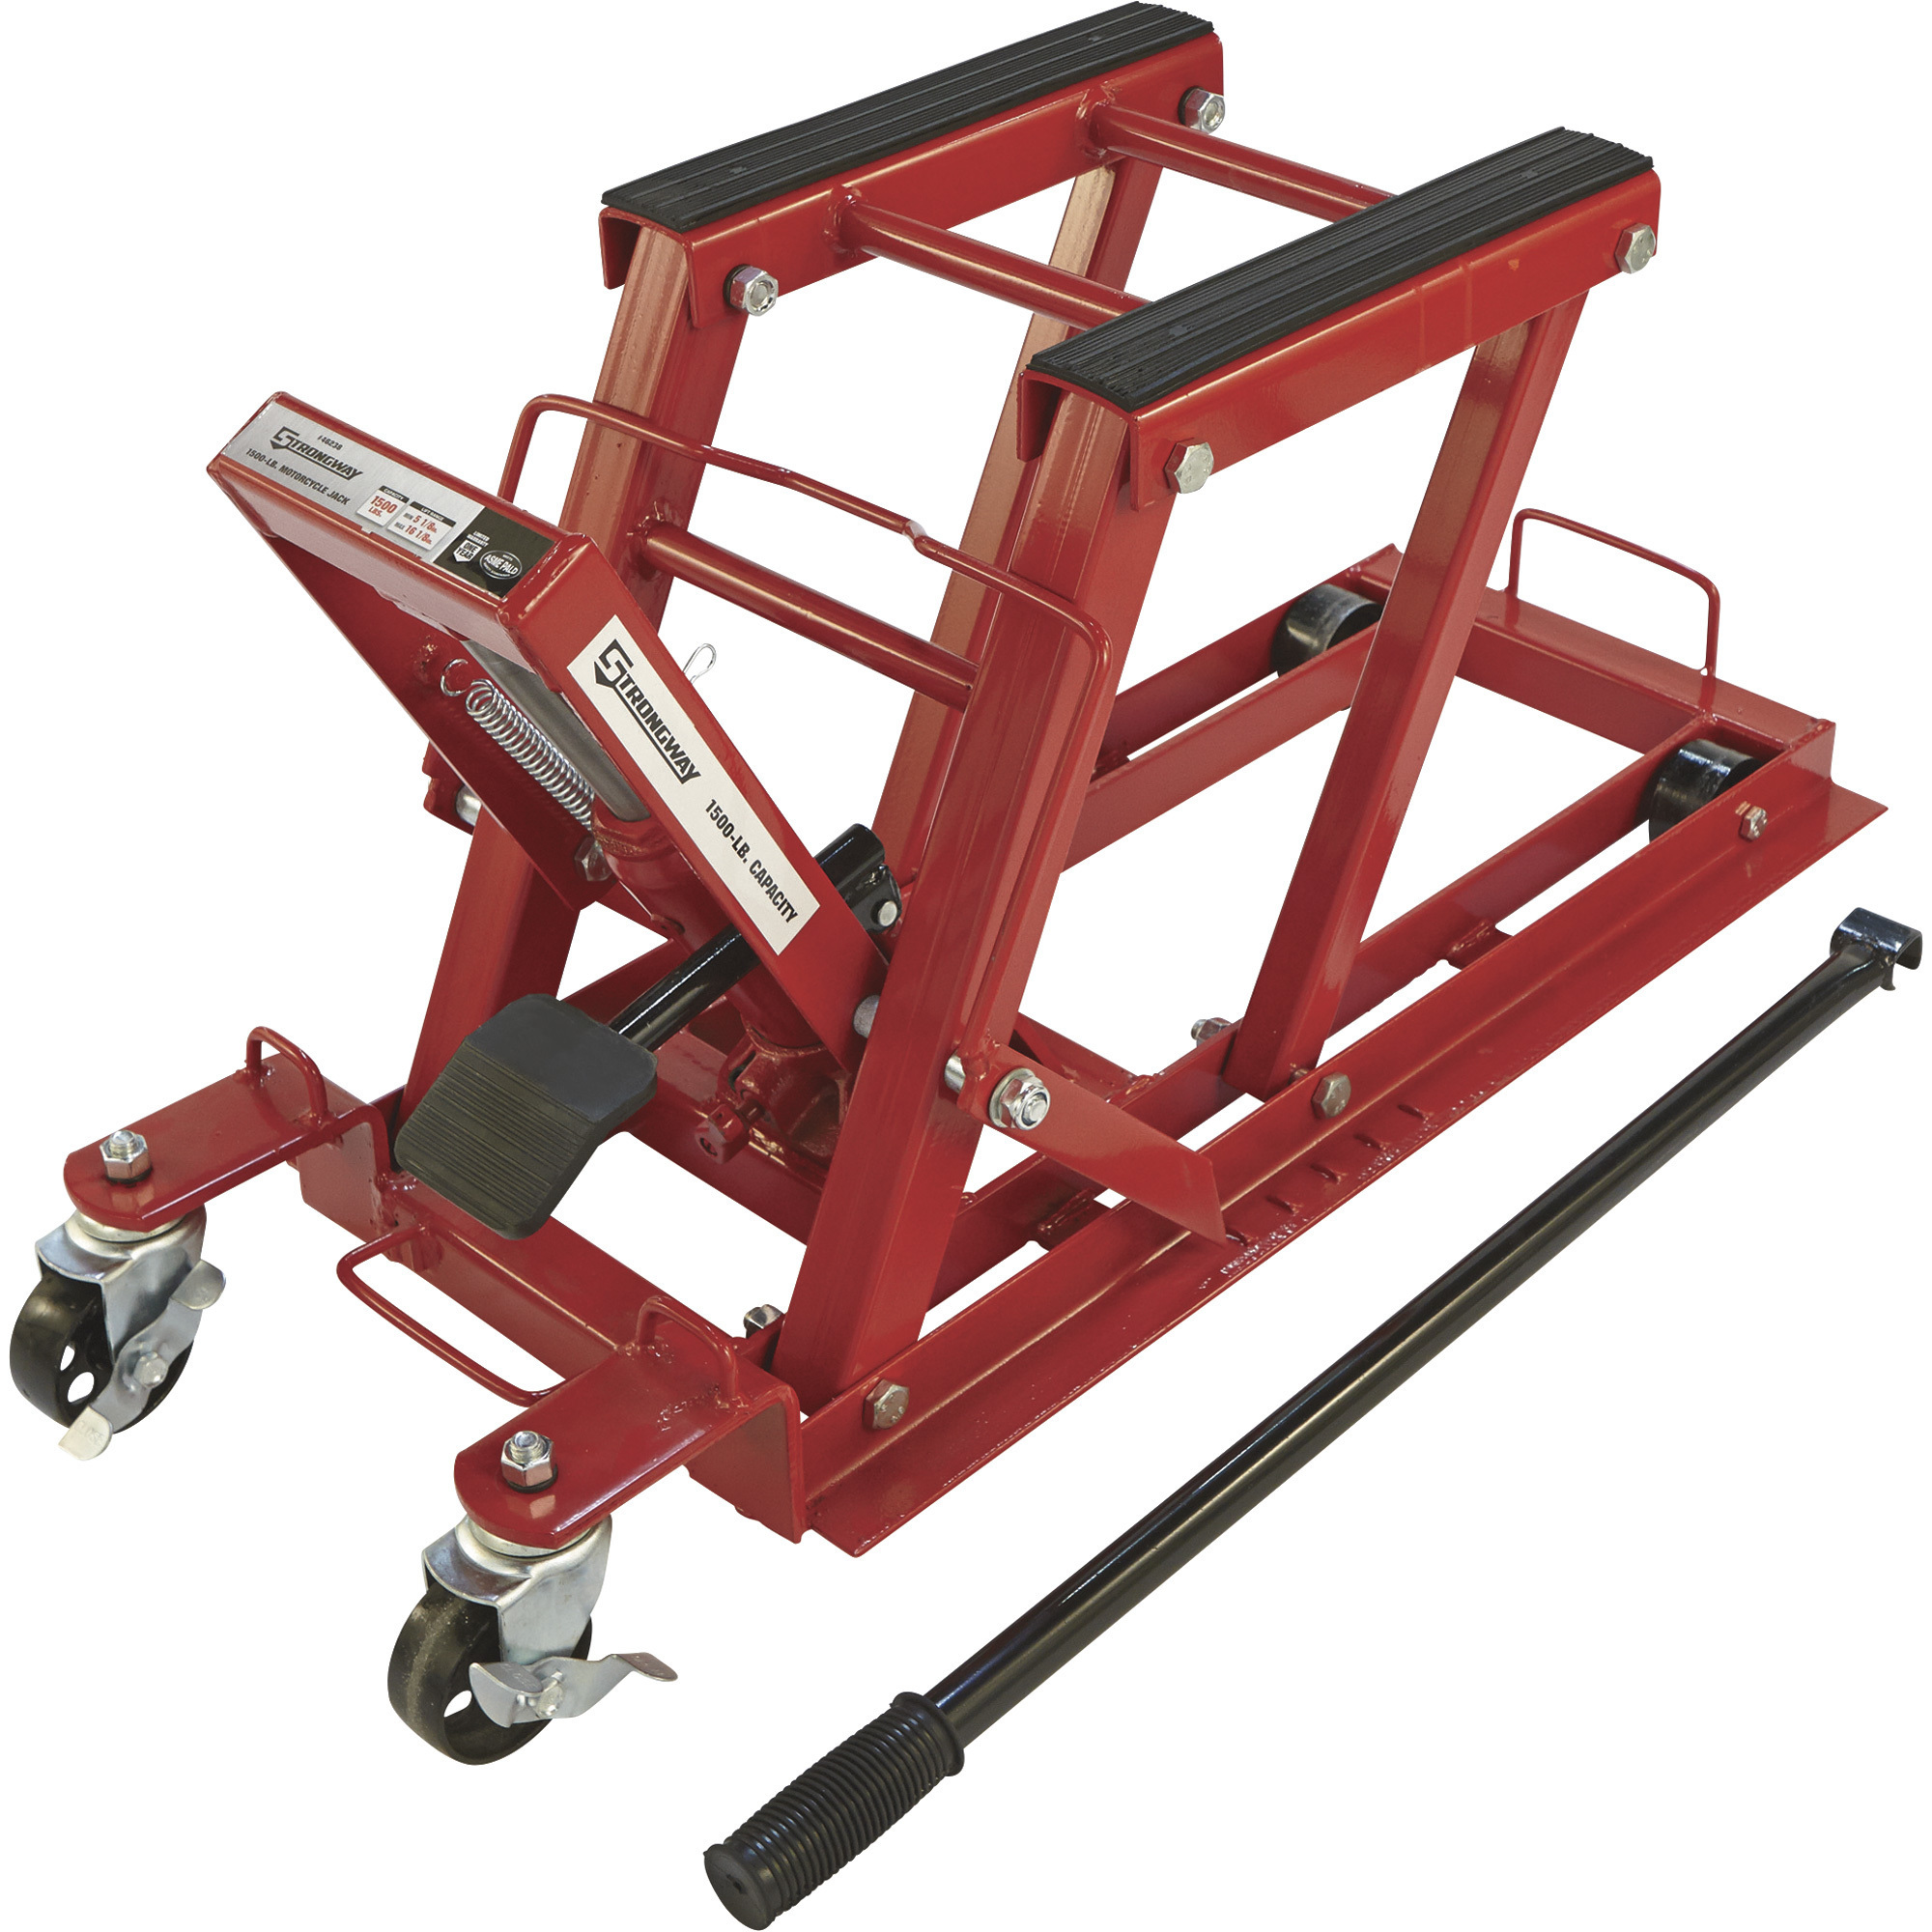 Strongway 1500-Lb. Hydraulic Motorcycle Lift/Utility Vehicle Lift -  NT66751X